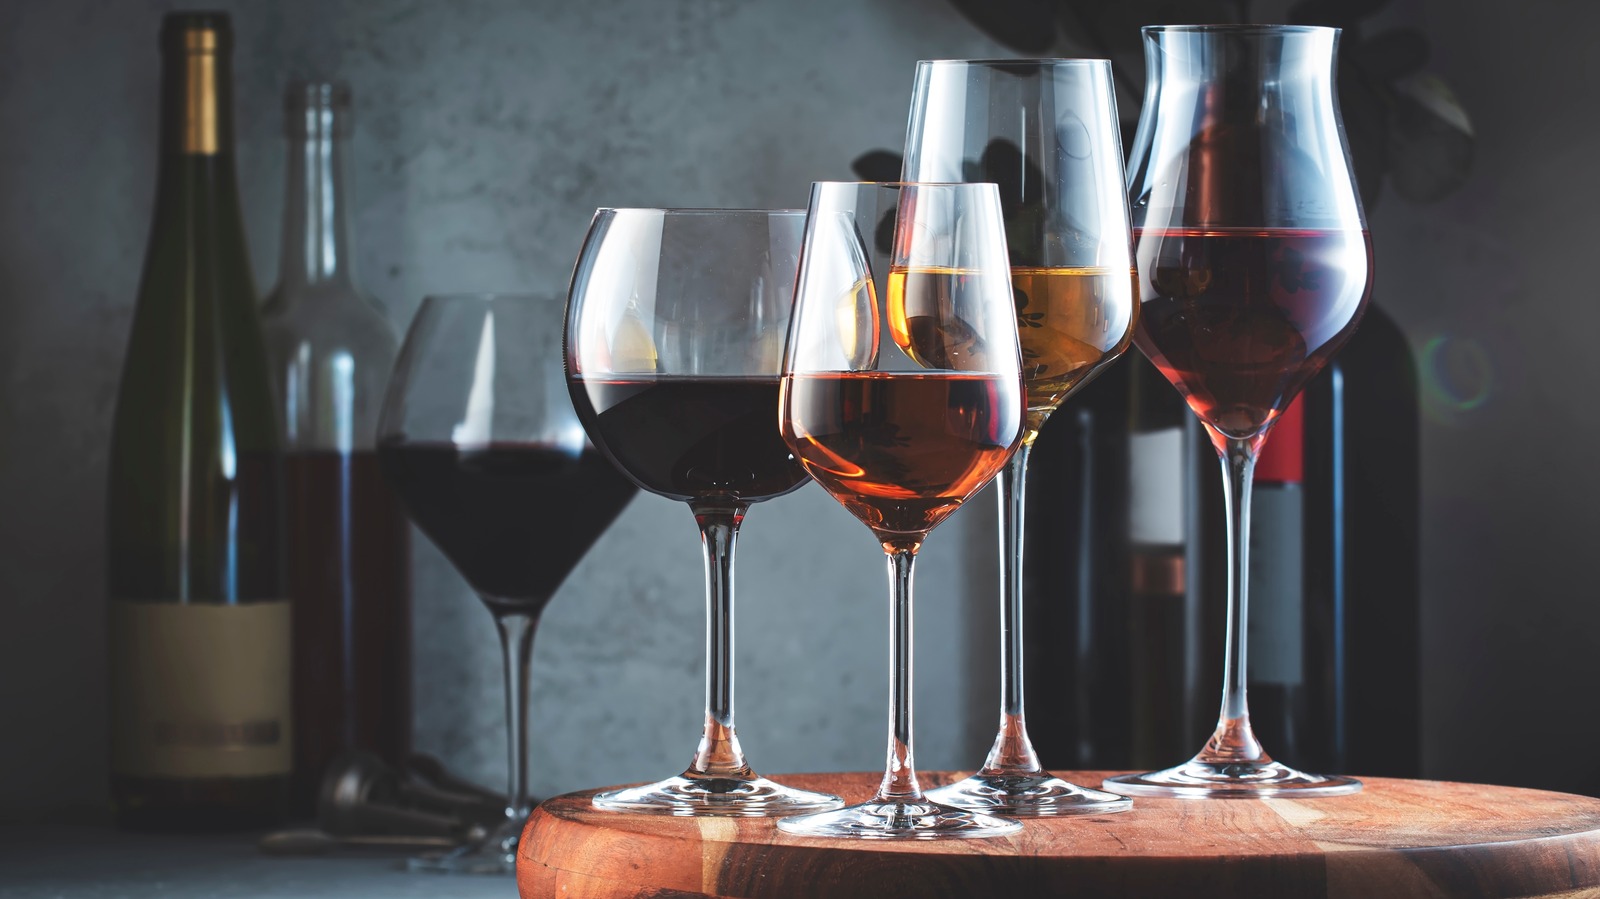 The Difference Between Burgundy And Bordeaux Wine Glasses